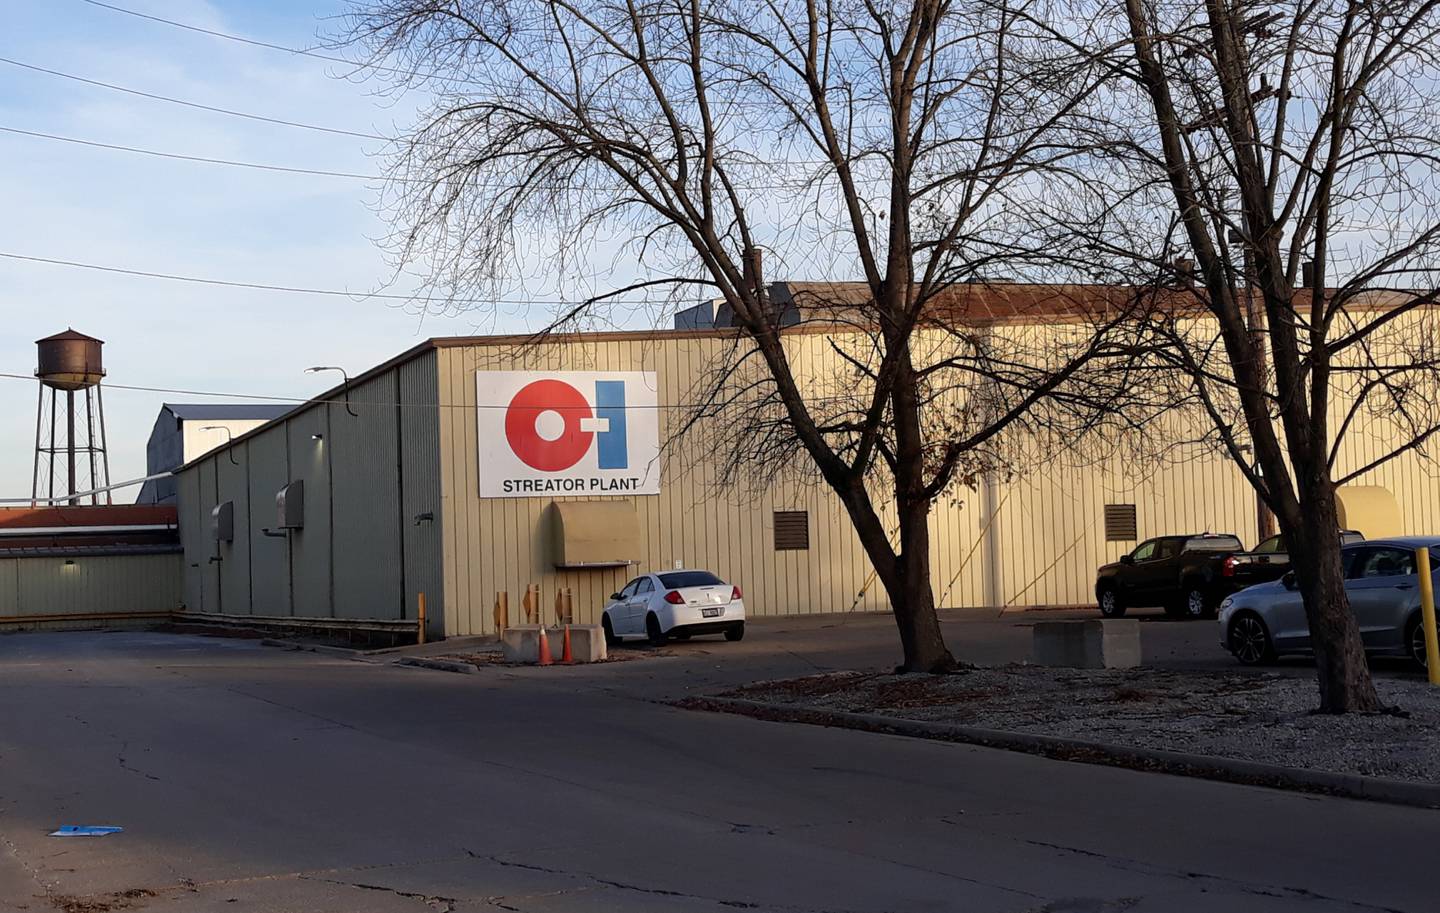 Owens-Illinois glass factory in Streator is expected to lay off a number of employees Jan. 1, after announcing one of its two furnaces will be shut down.